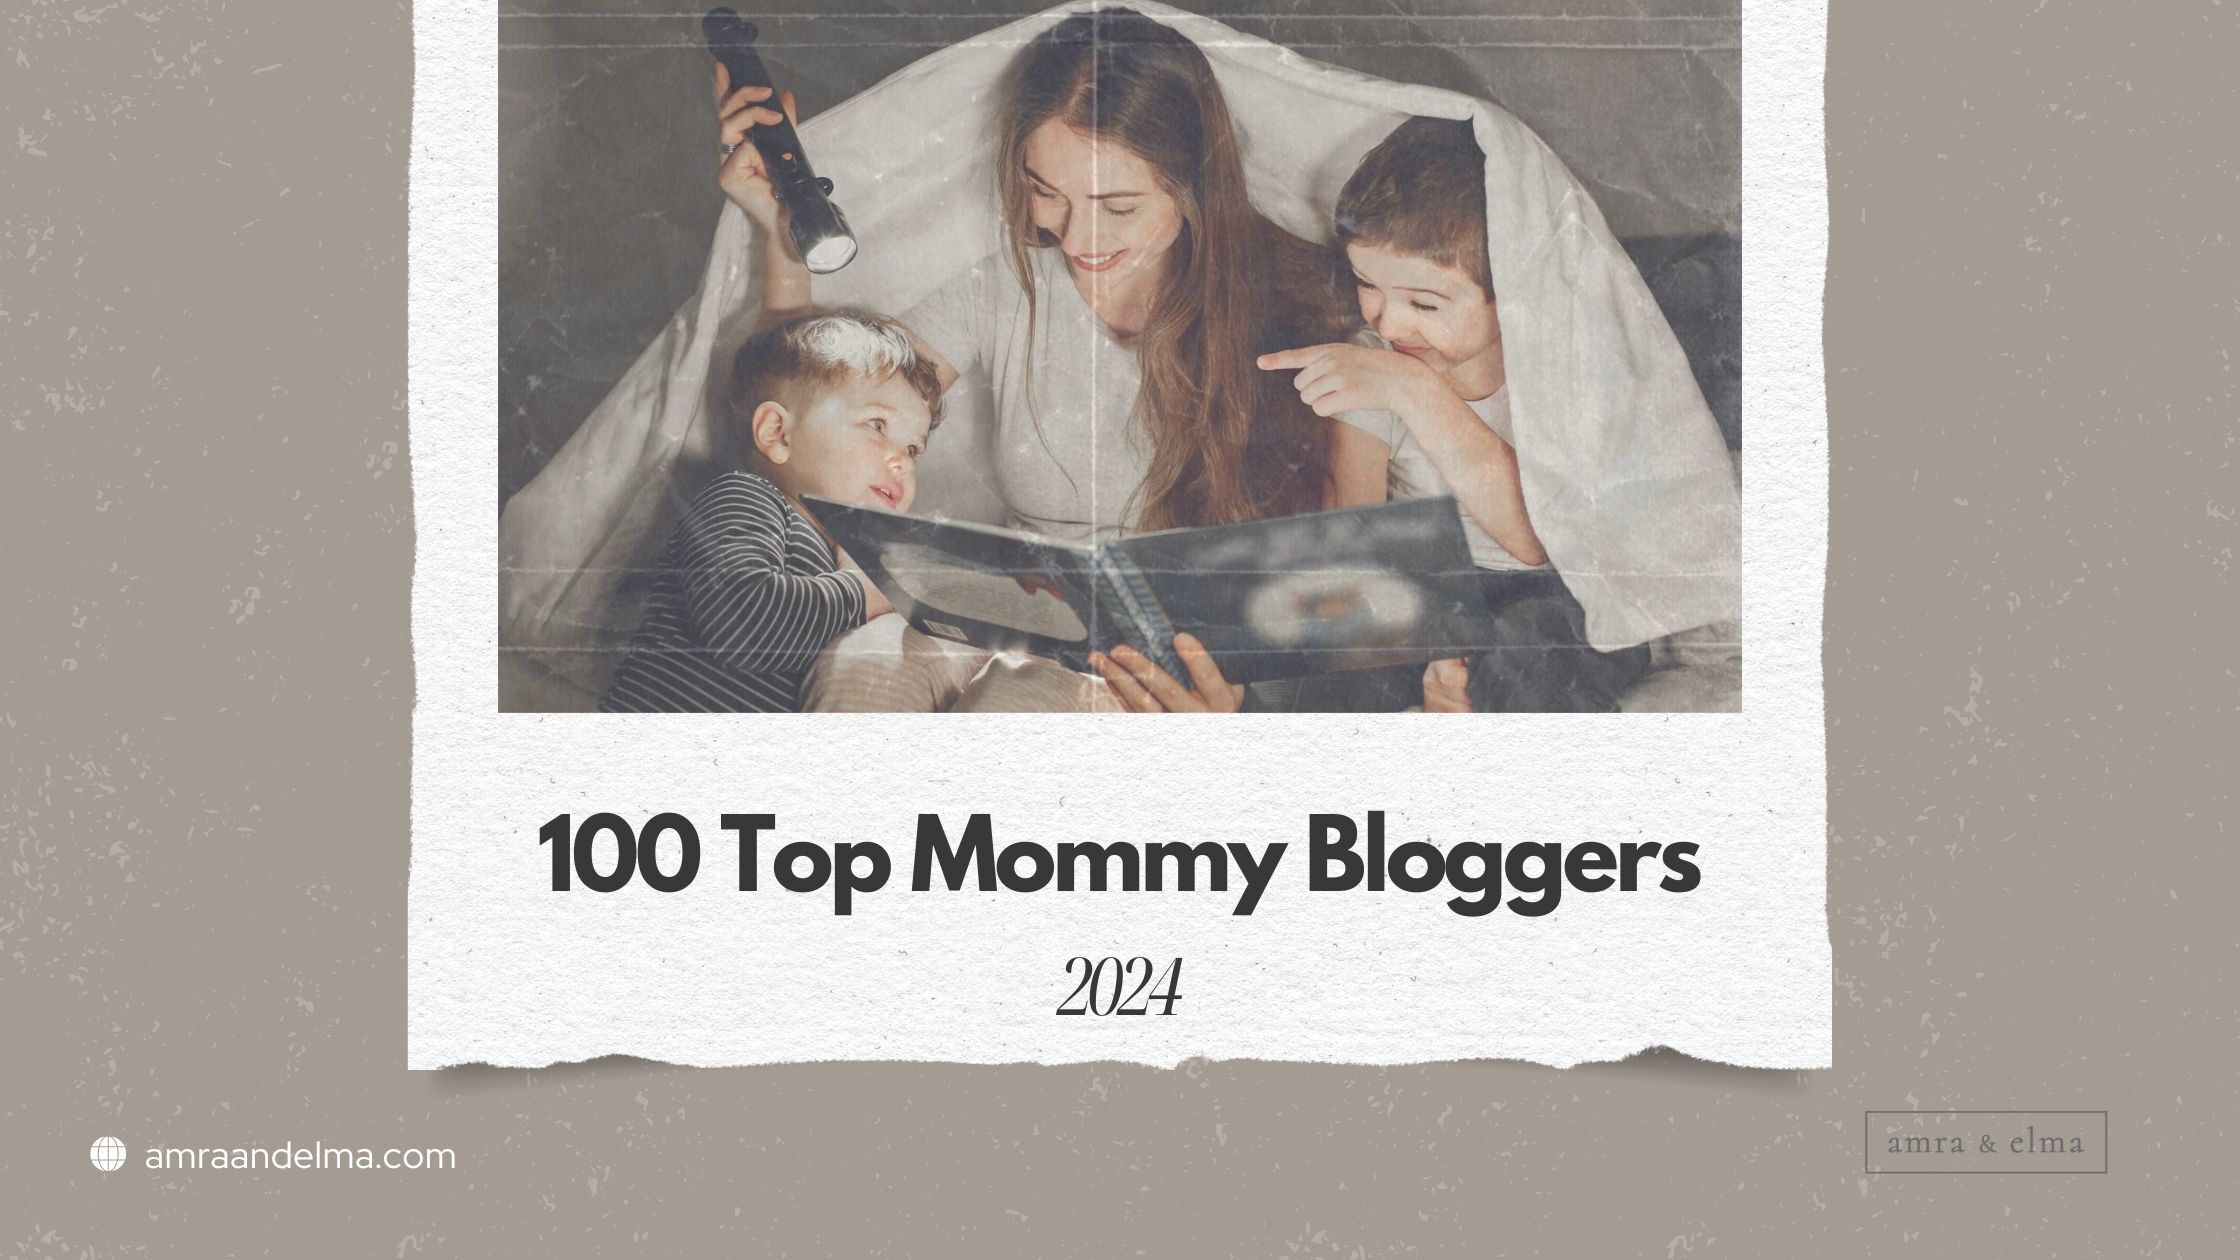 100 Top Mommy Bloggers